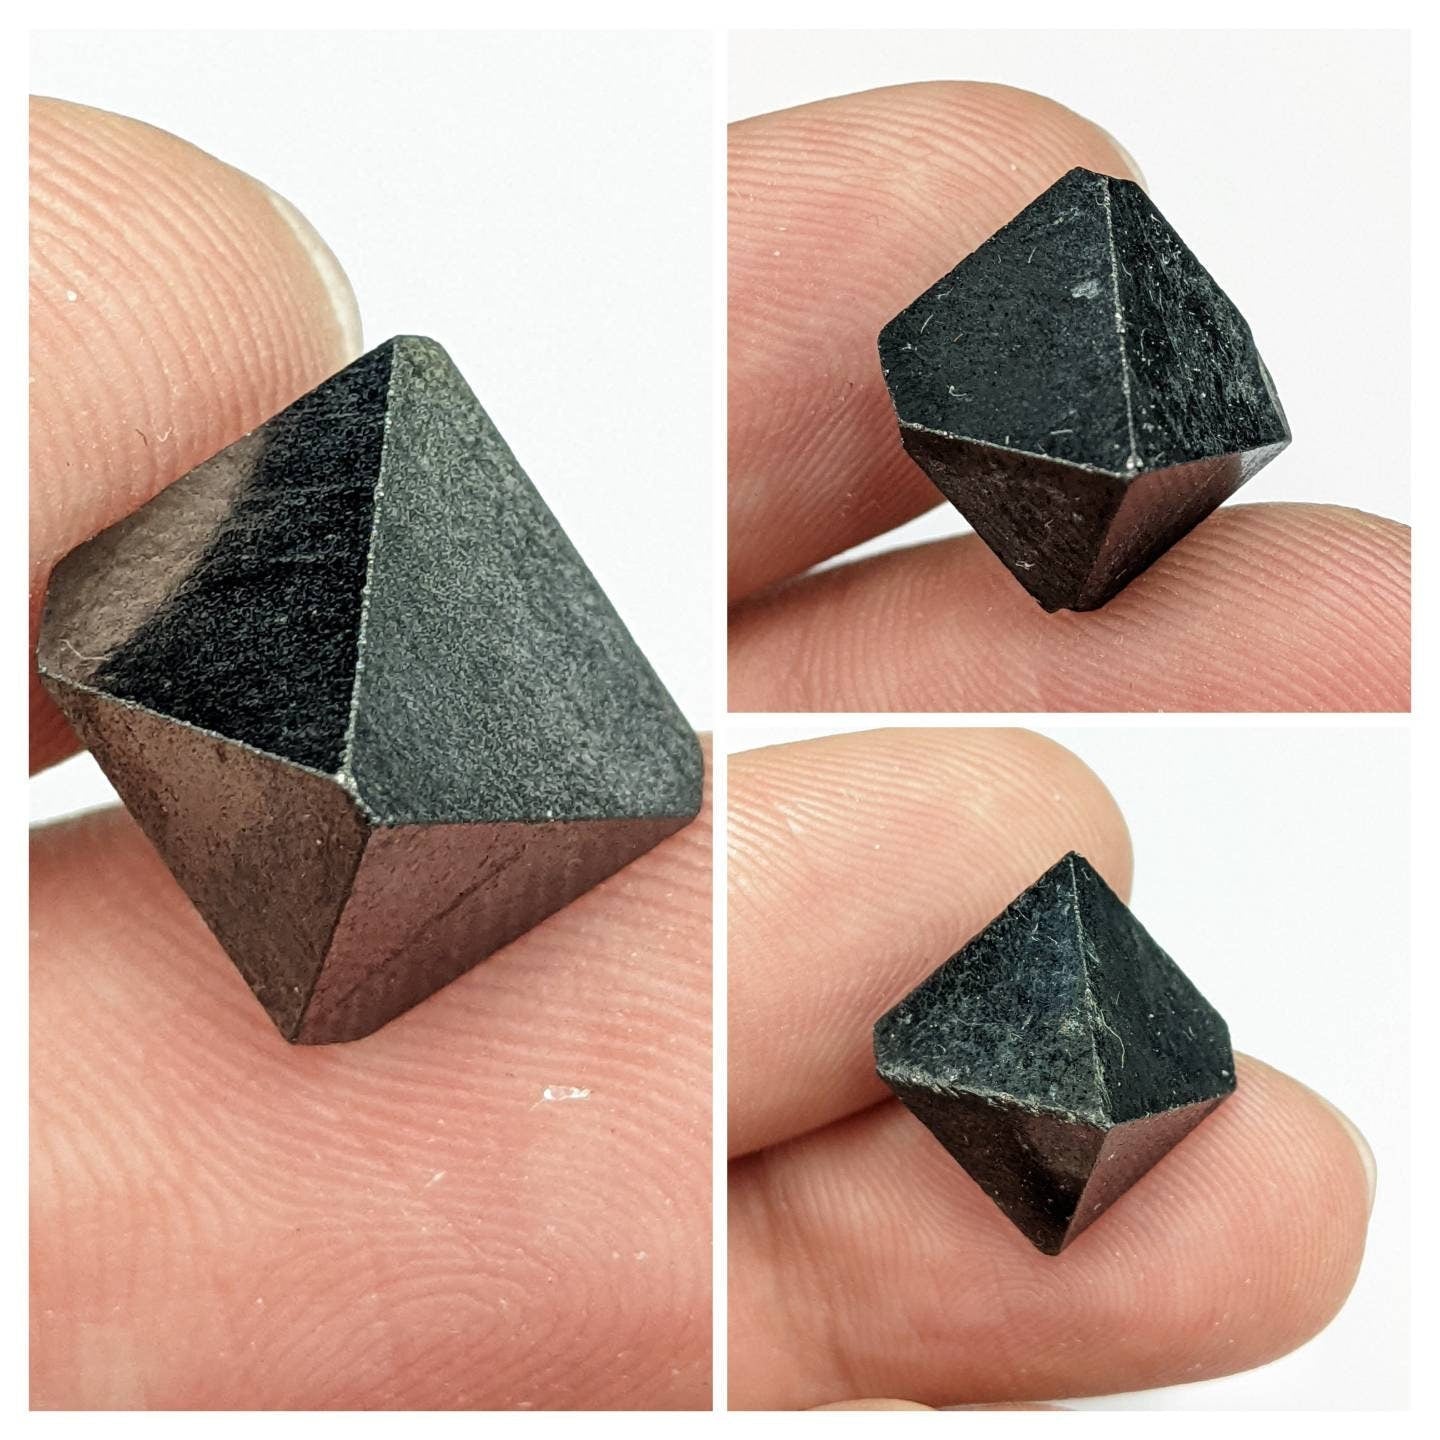 ARSAA GEMS AND MINERALSSmall lot of Black Magnetite crystal with octahedral structure from Skardu Gilgit Baltistan Pakistan, 12 grams - Premium  from ARSAA GEMS AND MINERALS - Just $30.00! Shop now at ARSAA GEMS AND MINERALS